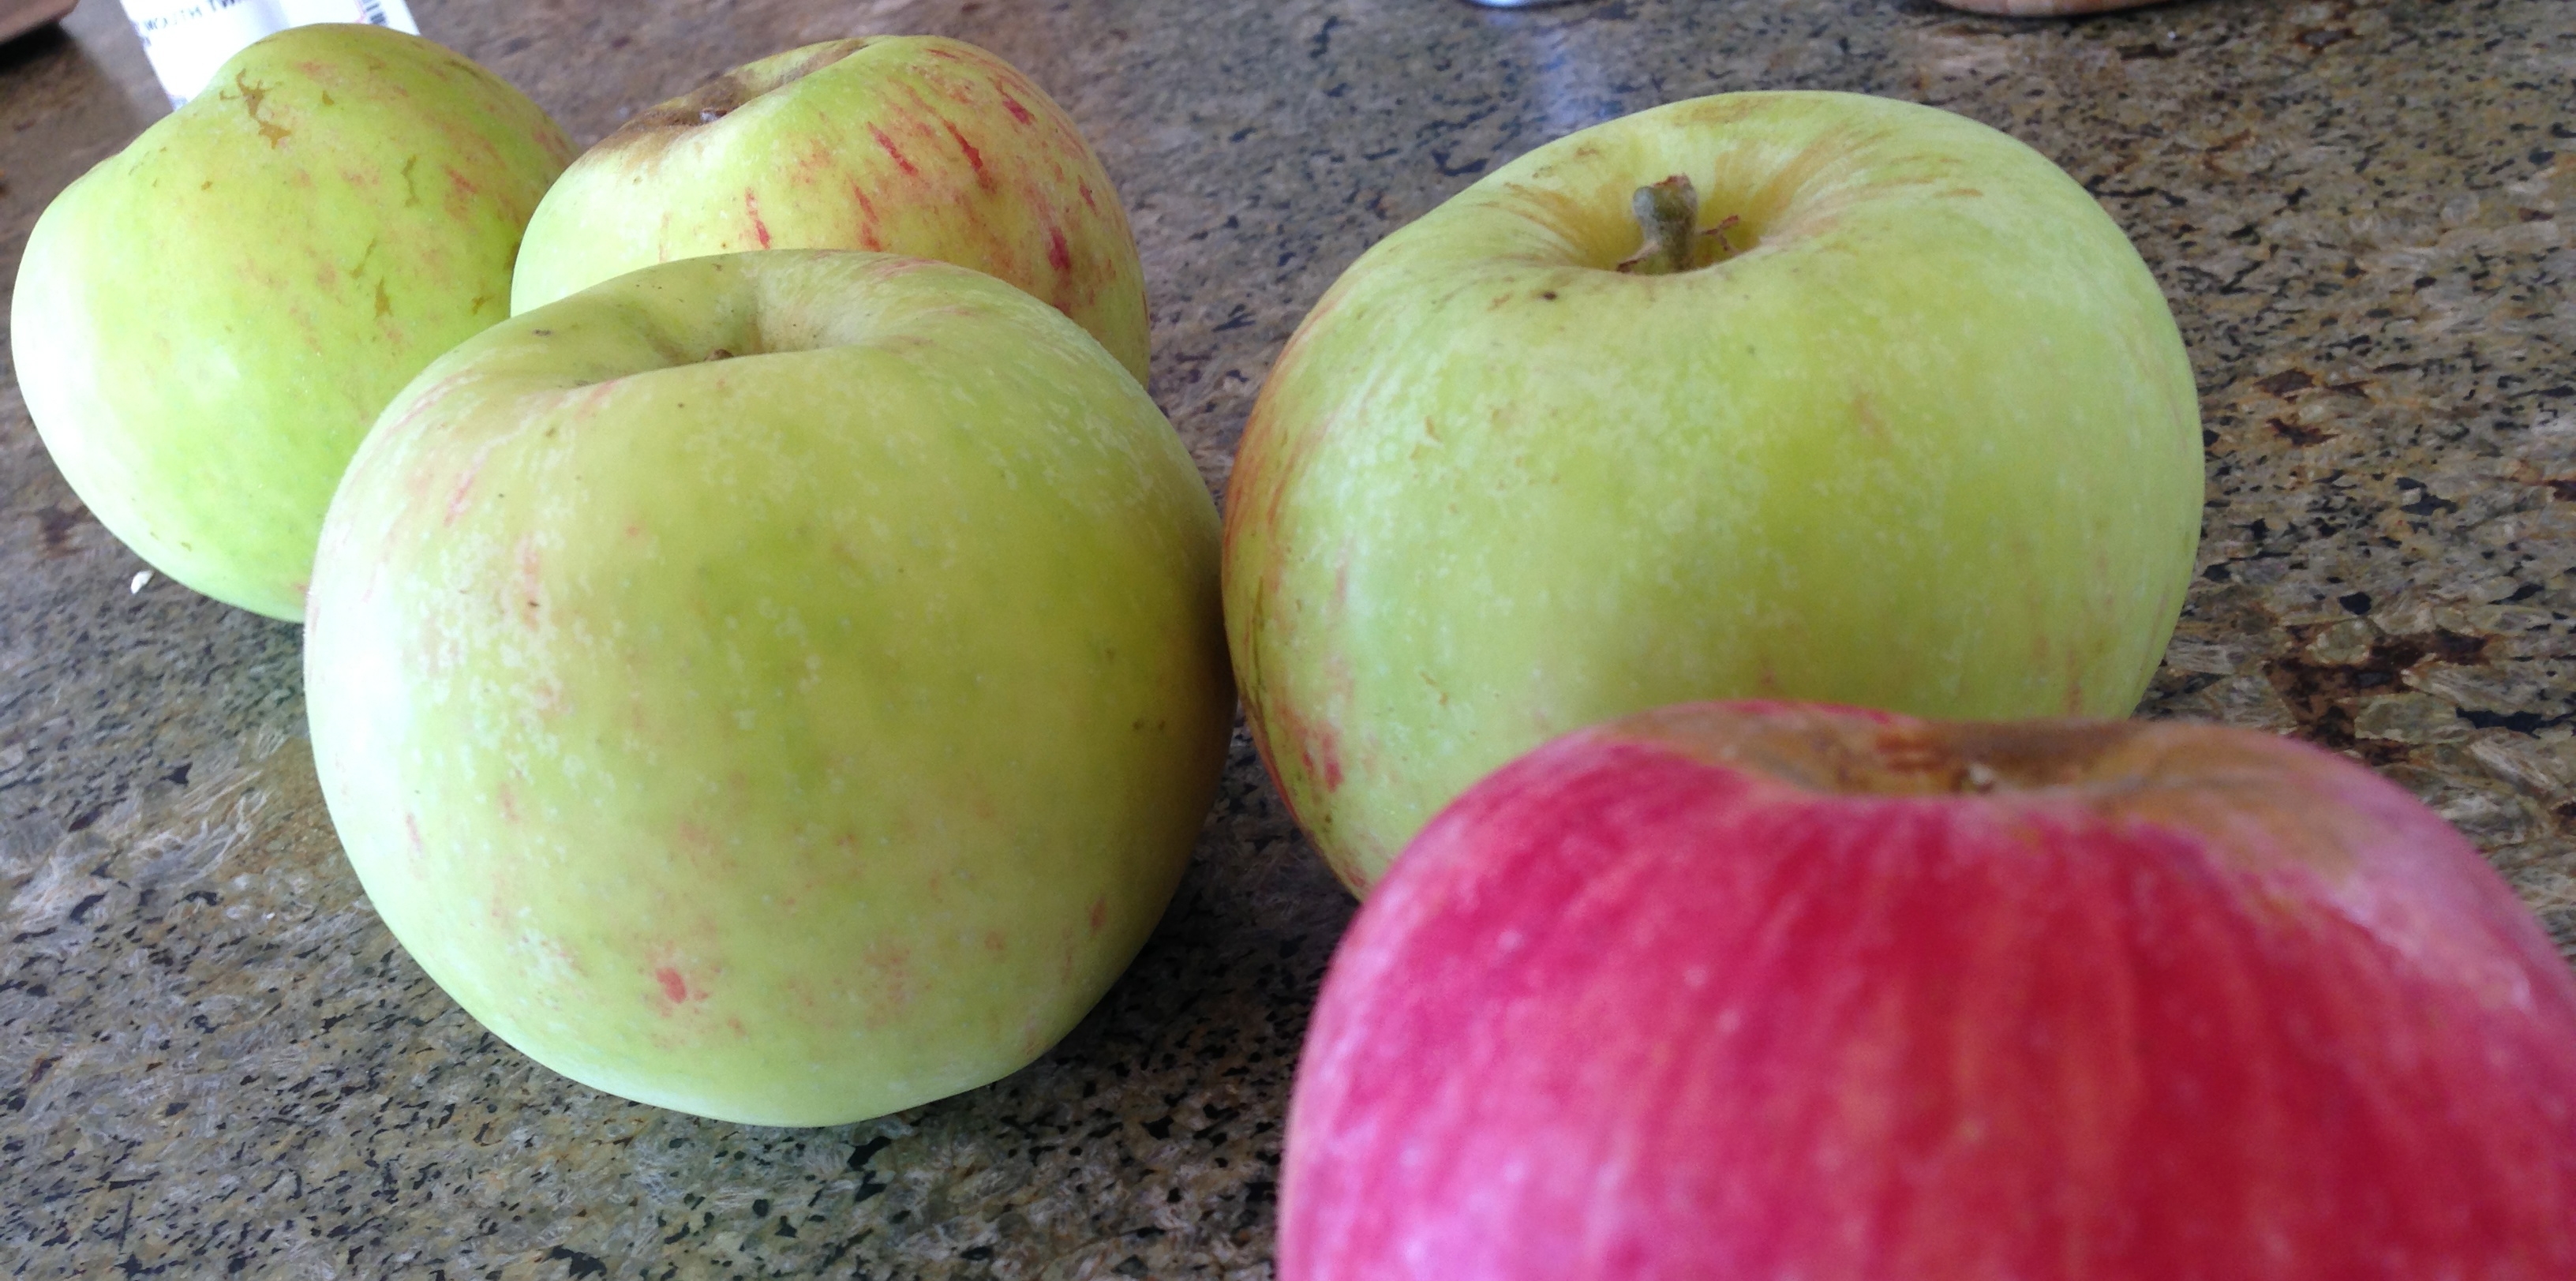 The first gravenstein apples of the 2013 season.